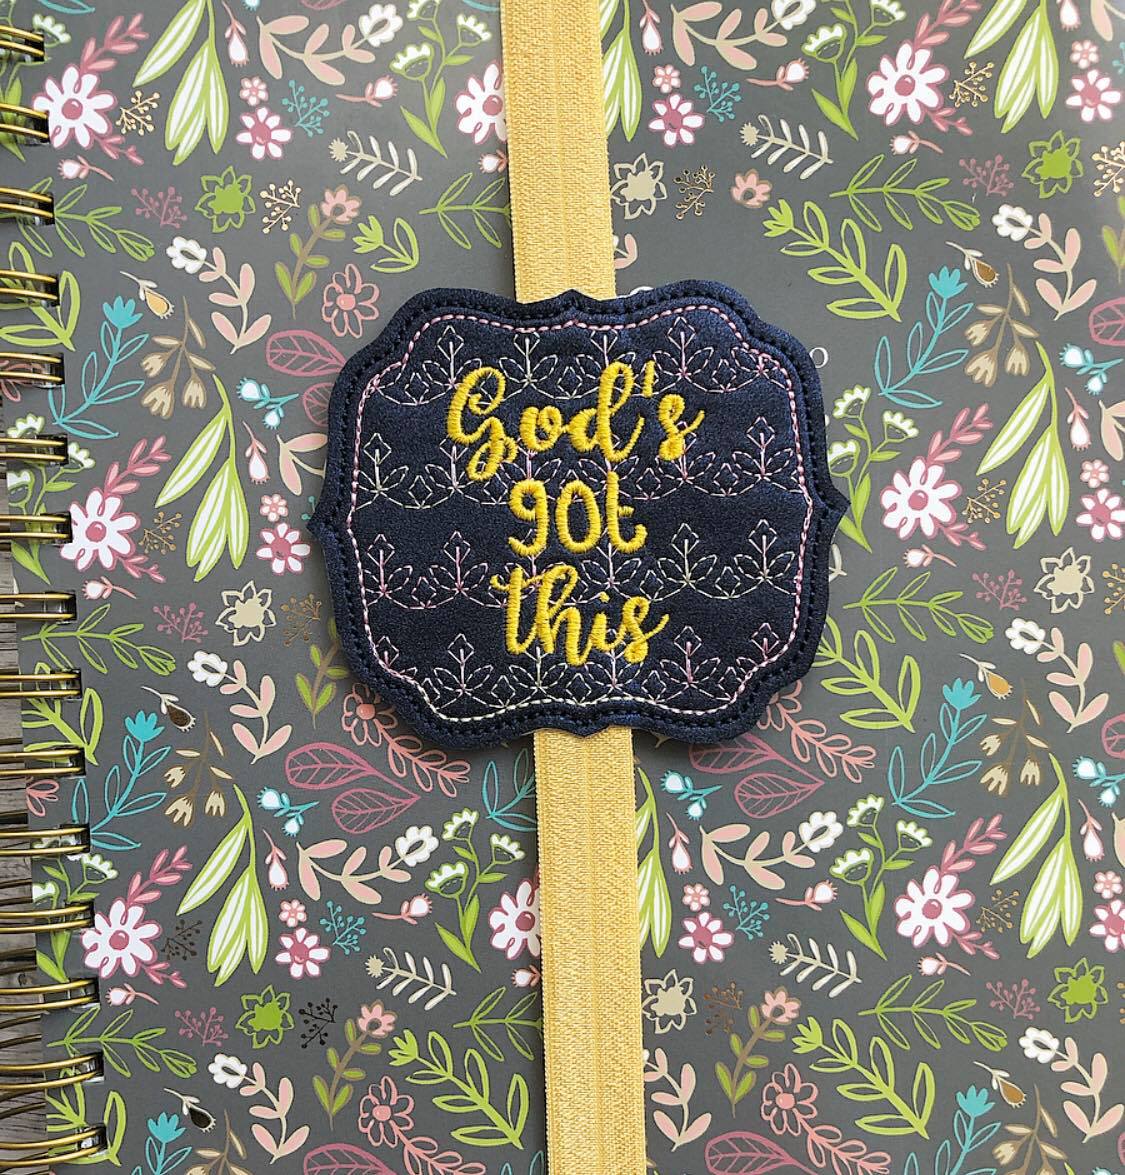 Gods got this Book Band - Digital Embroidery Design